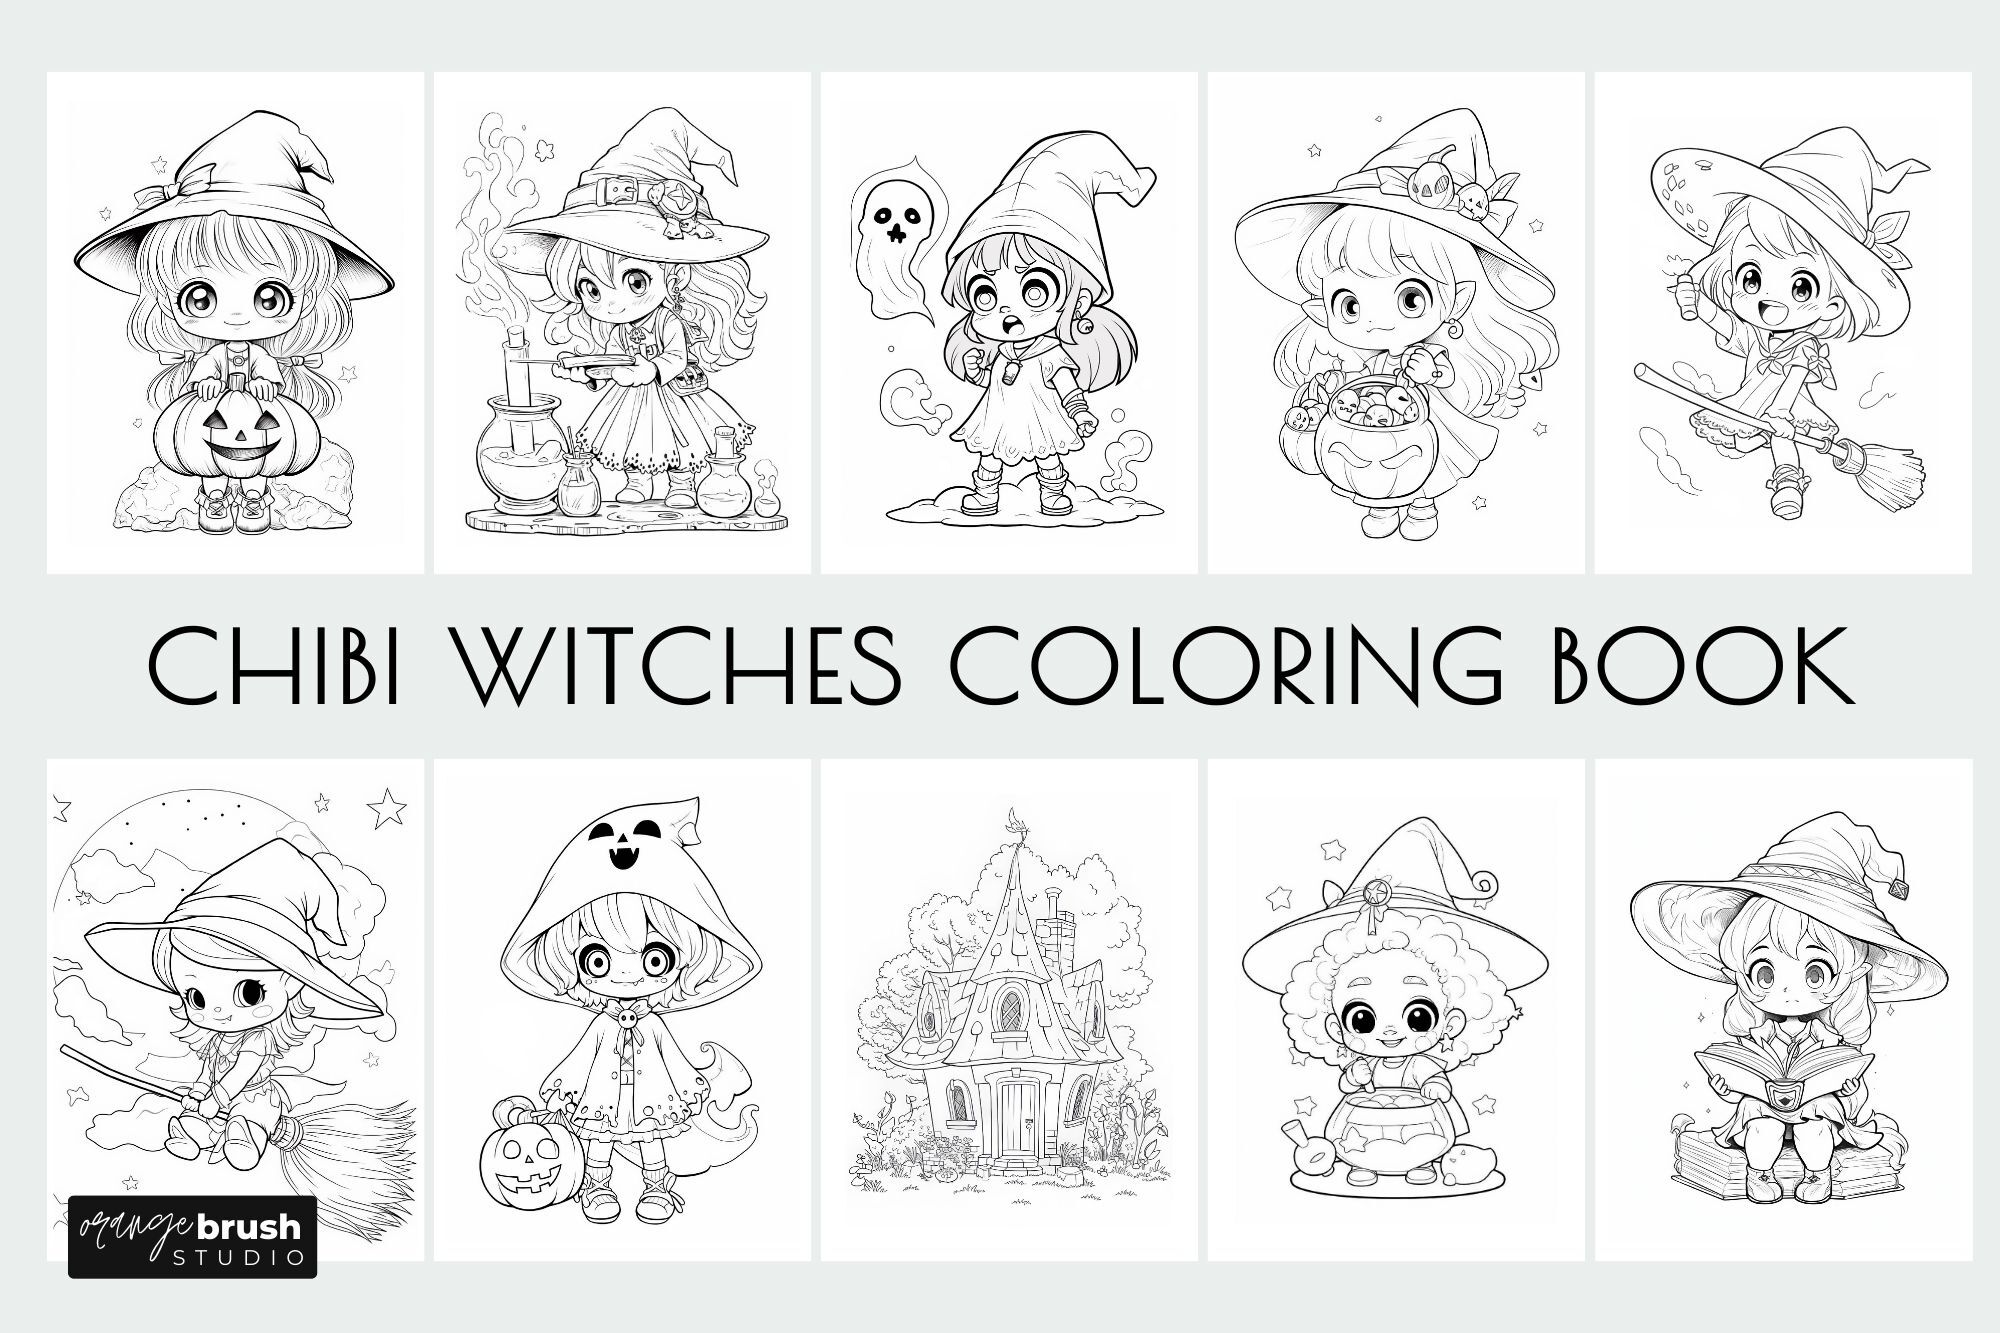 Chibi witch halloween coloring book for kids by orange brush studio